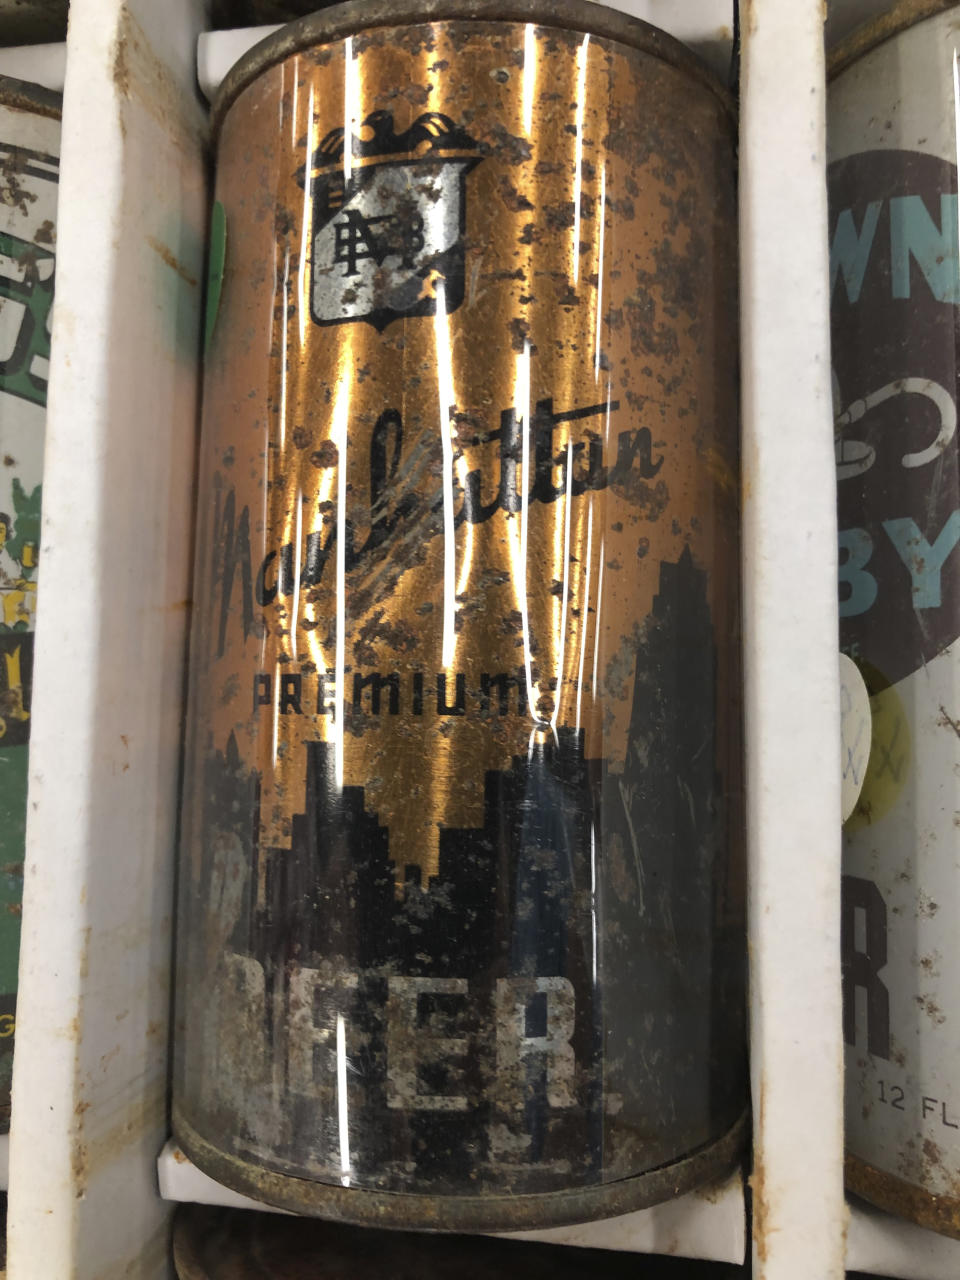 A 1930s-era beer can from the Manhattan Brewing Company, connected with mobster Al Capone, sits on display Thursday, Aug. 29, 2019, in Albuquerque, N.M., at the 49th annual gathering of members of the Brewery Collectibles Club of America. Collectors from around the world began Thursday buying, trading and selling containers of brews at the annual four-day event billed the "CANvention." (AP Photo/Russell Contreras)